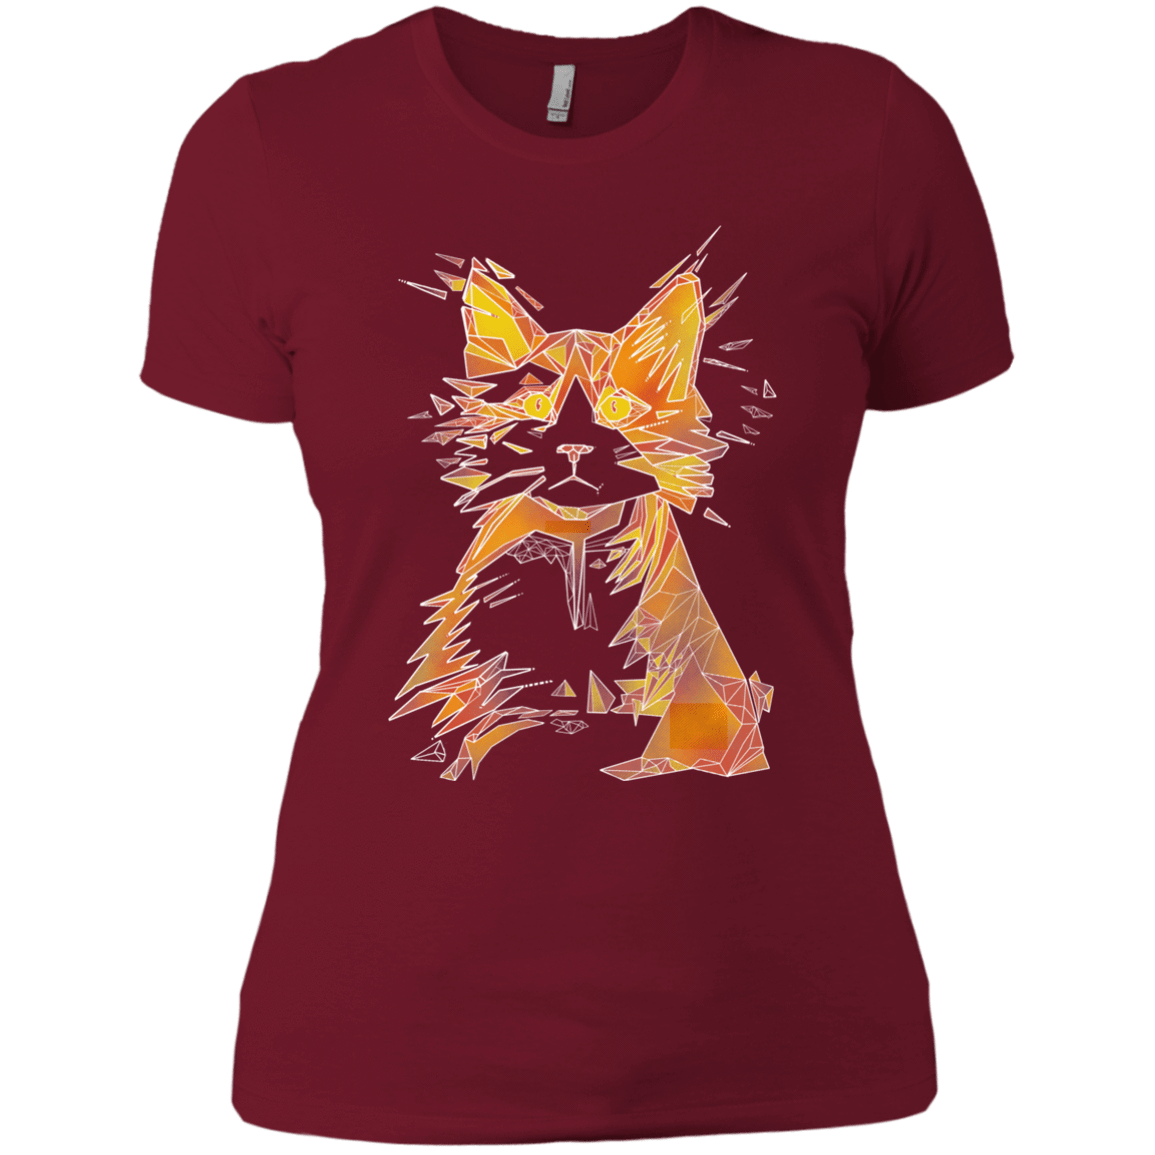 T-Shirts Scarlet / X-Small Scattered Women's Premium T-Shirt